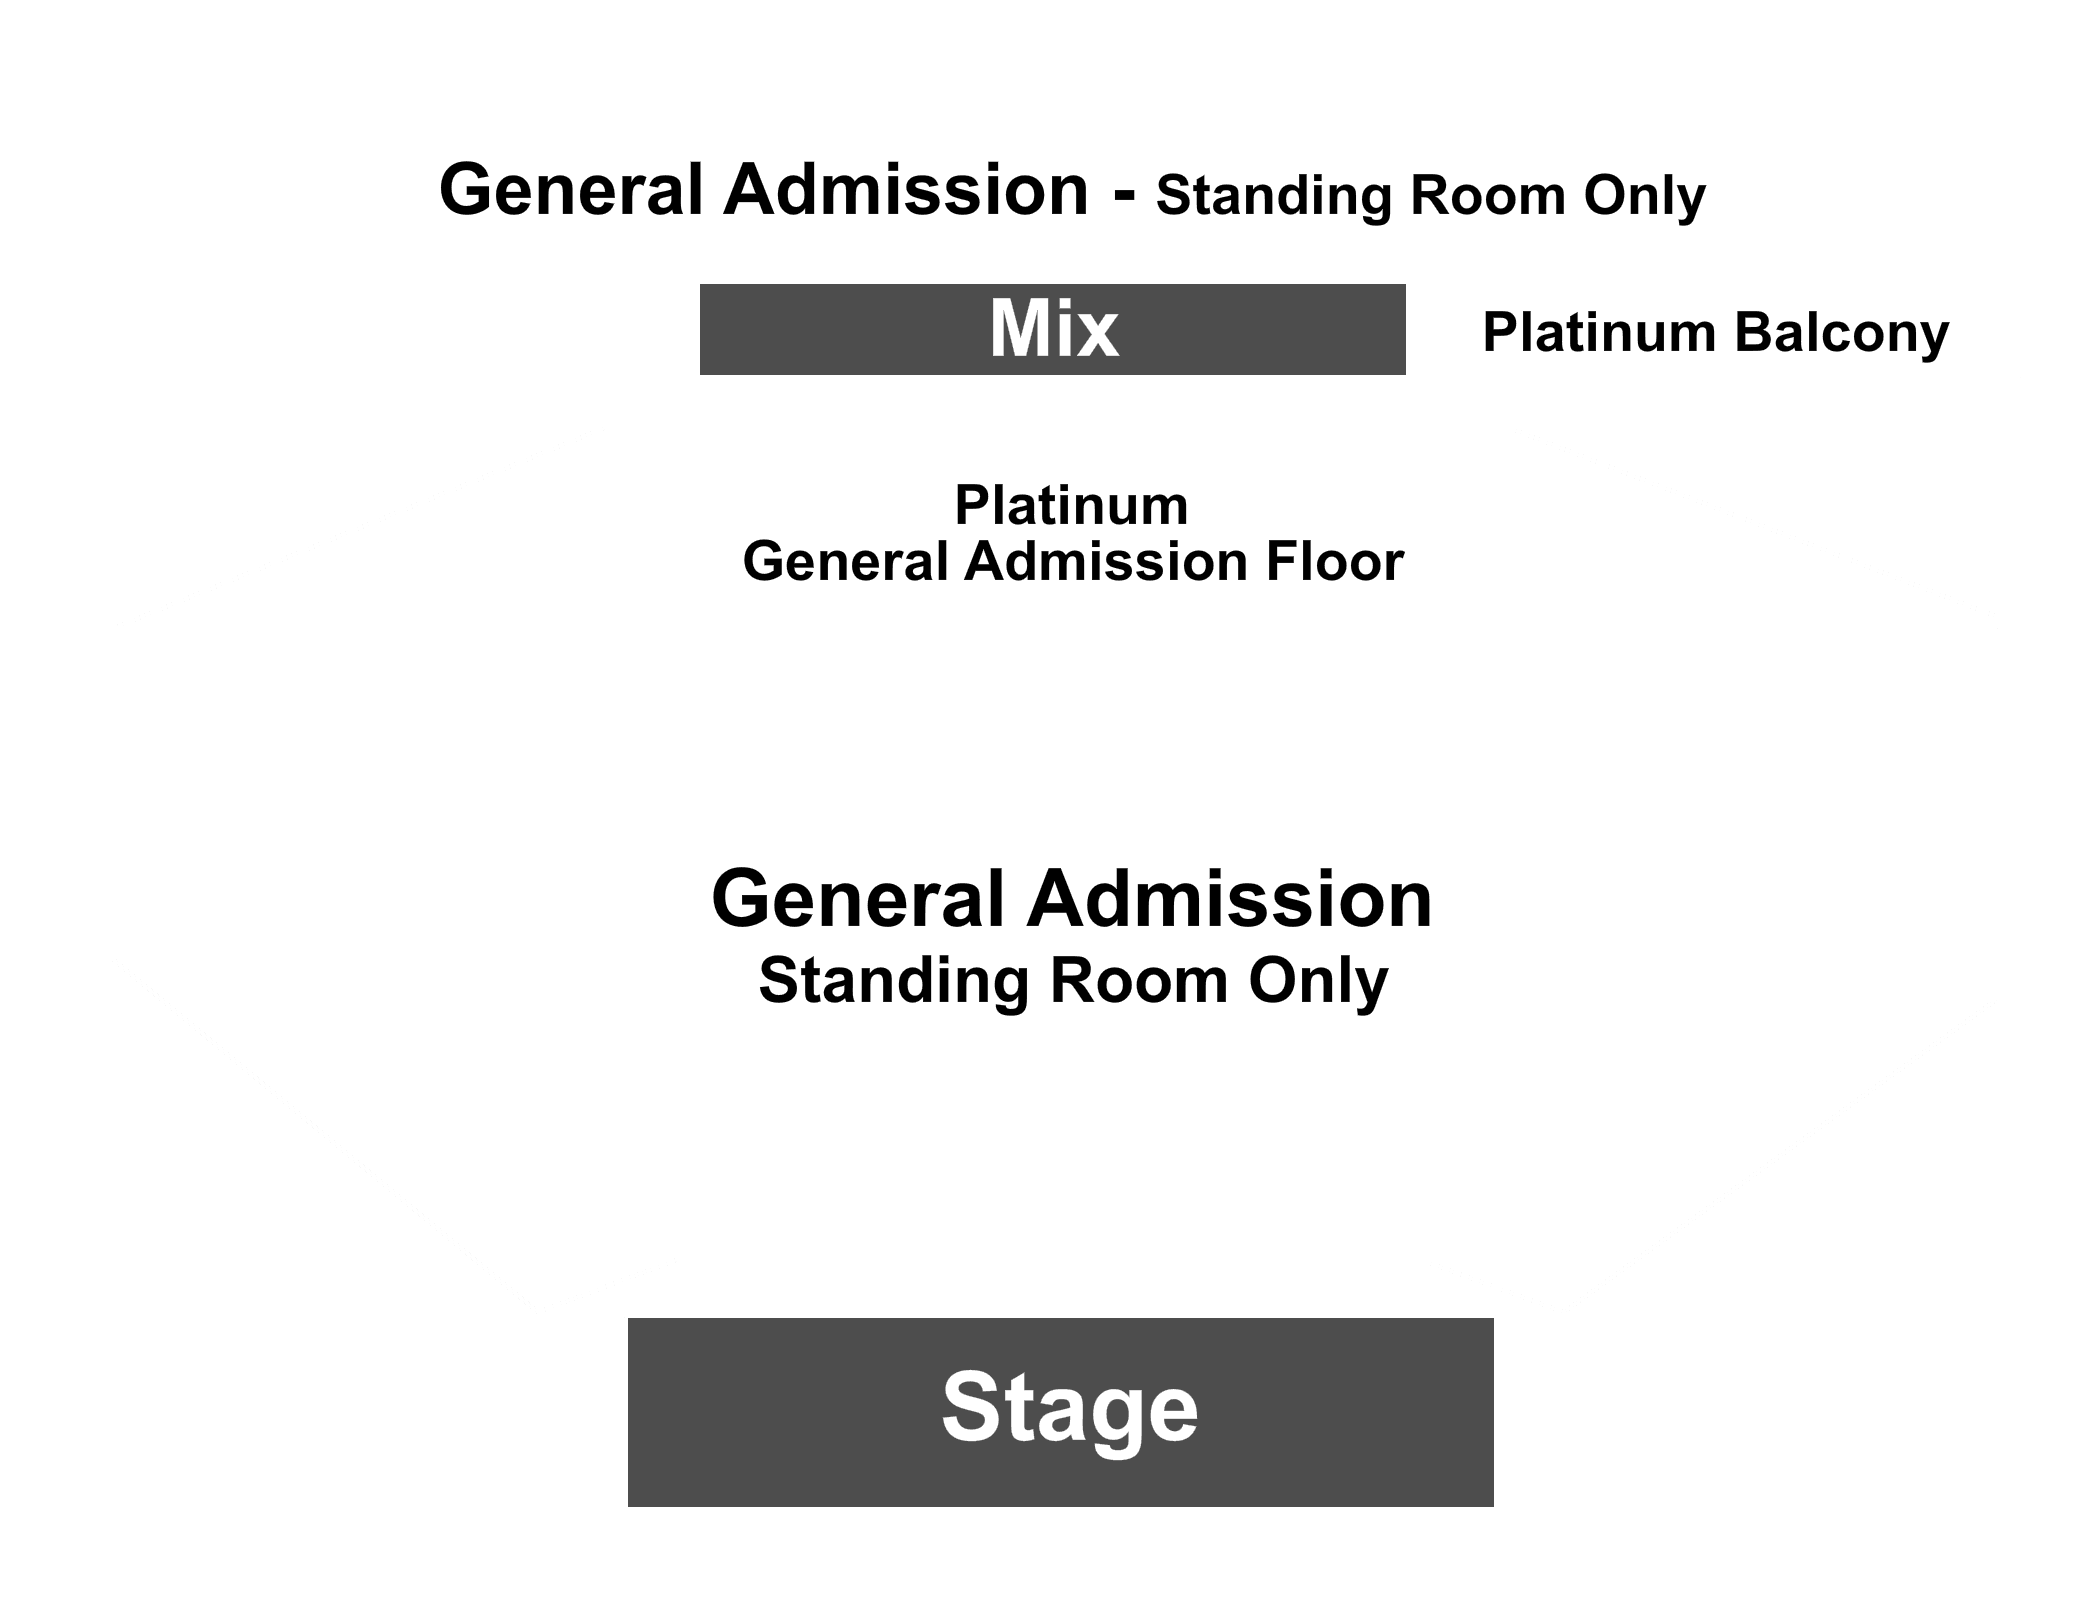 The Belasco Theater Seating Chart Los Angeles